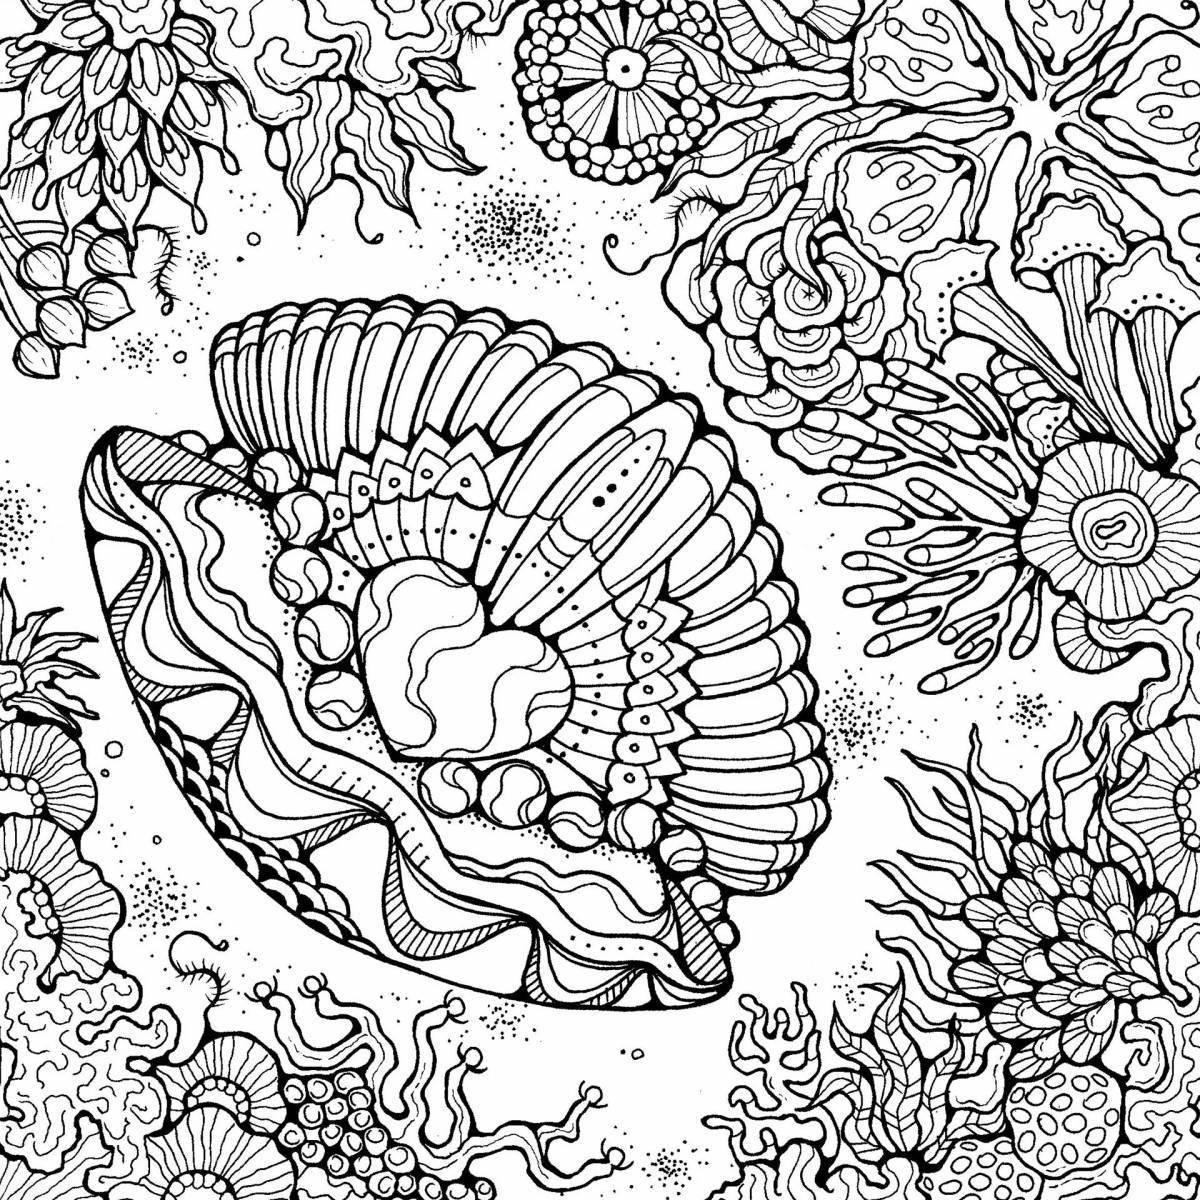 Fun coloring for adults and children